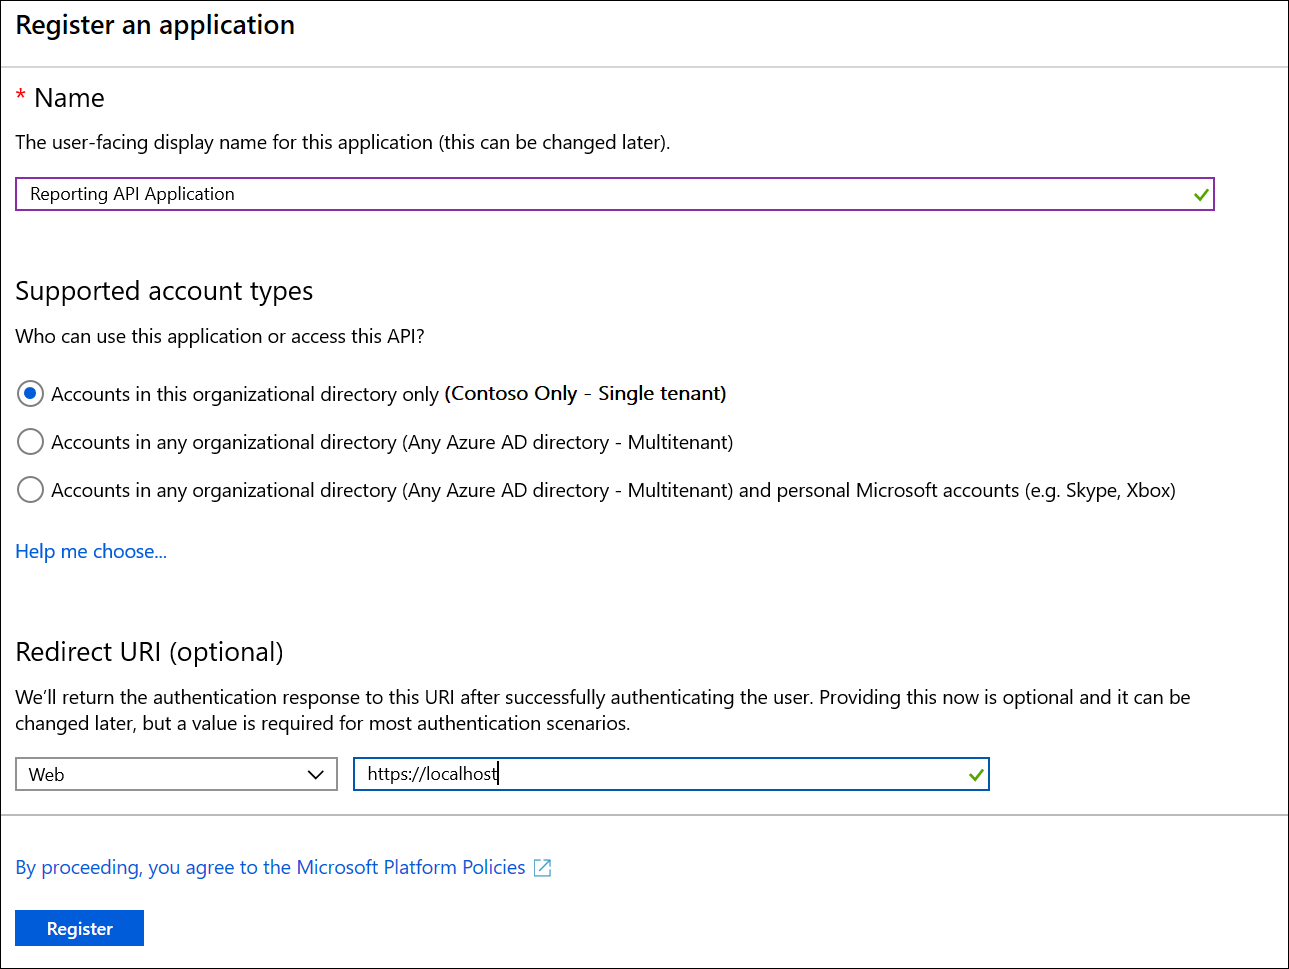 Screenshot shows the Register an application page where you can enter the values in this step.